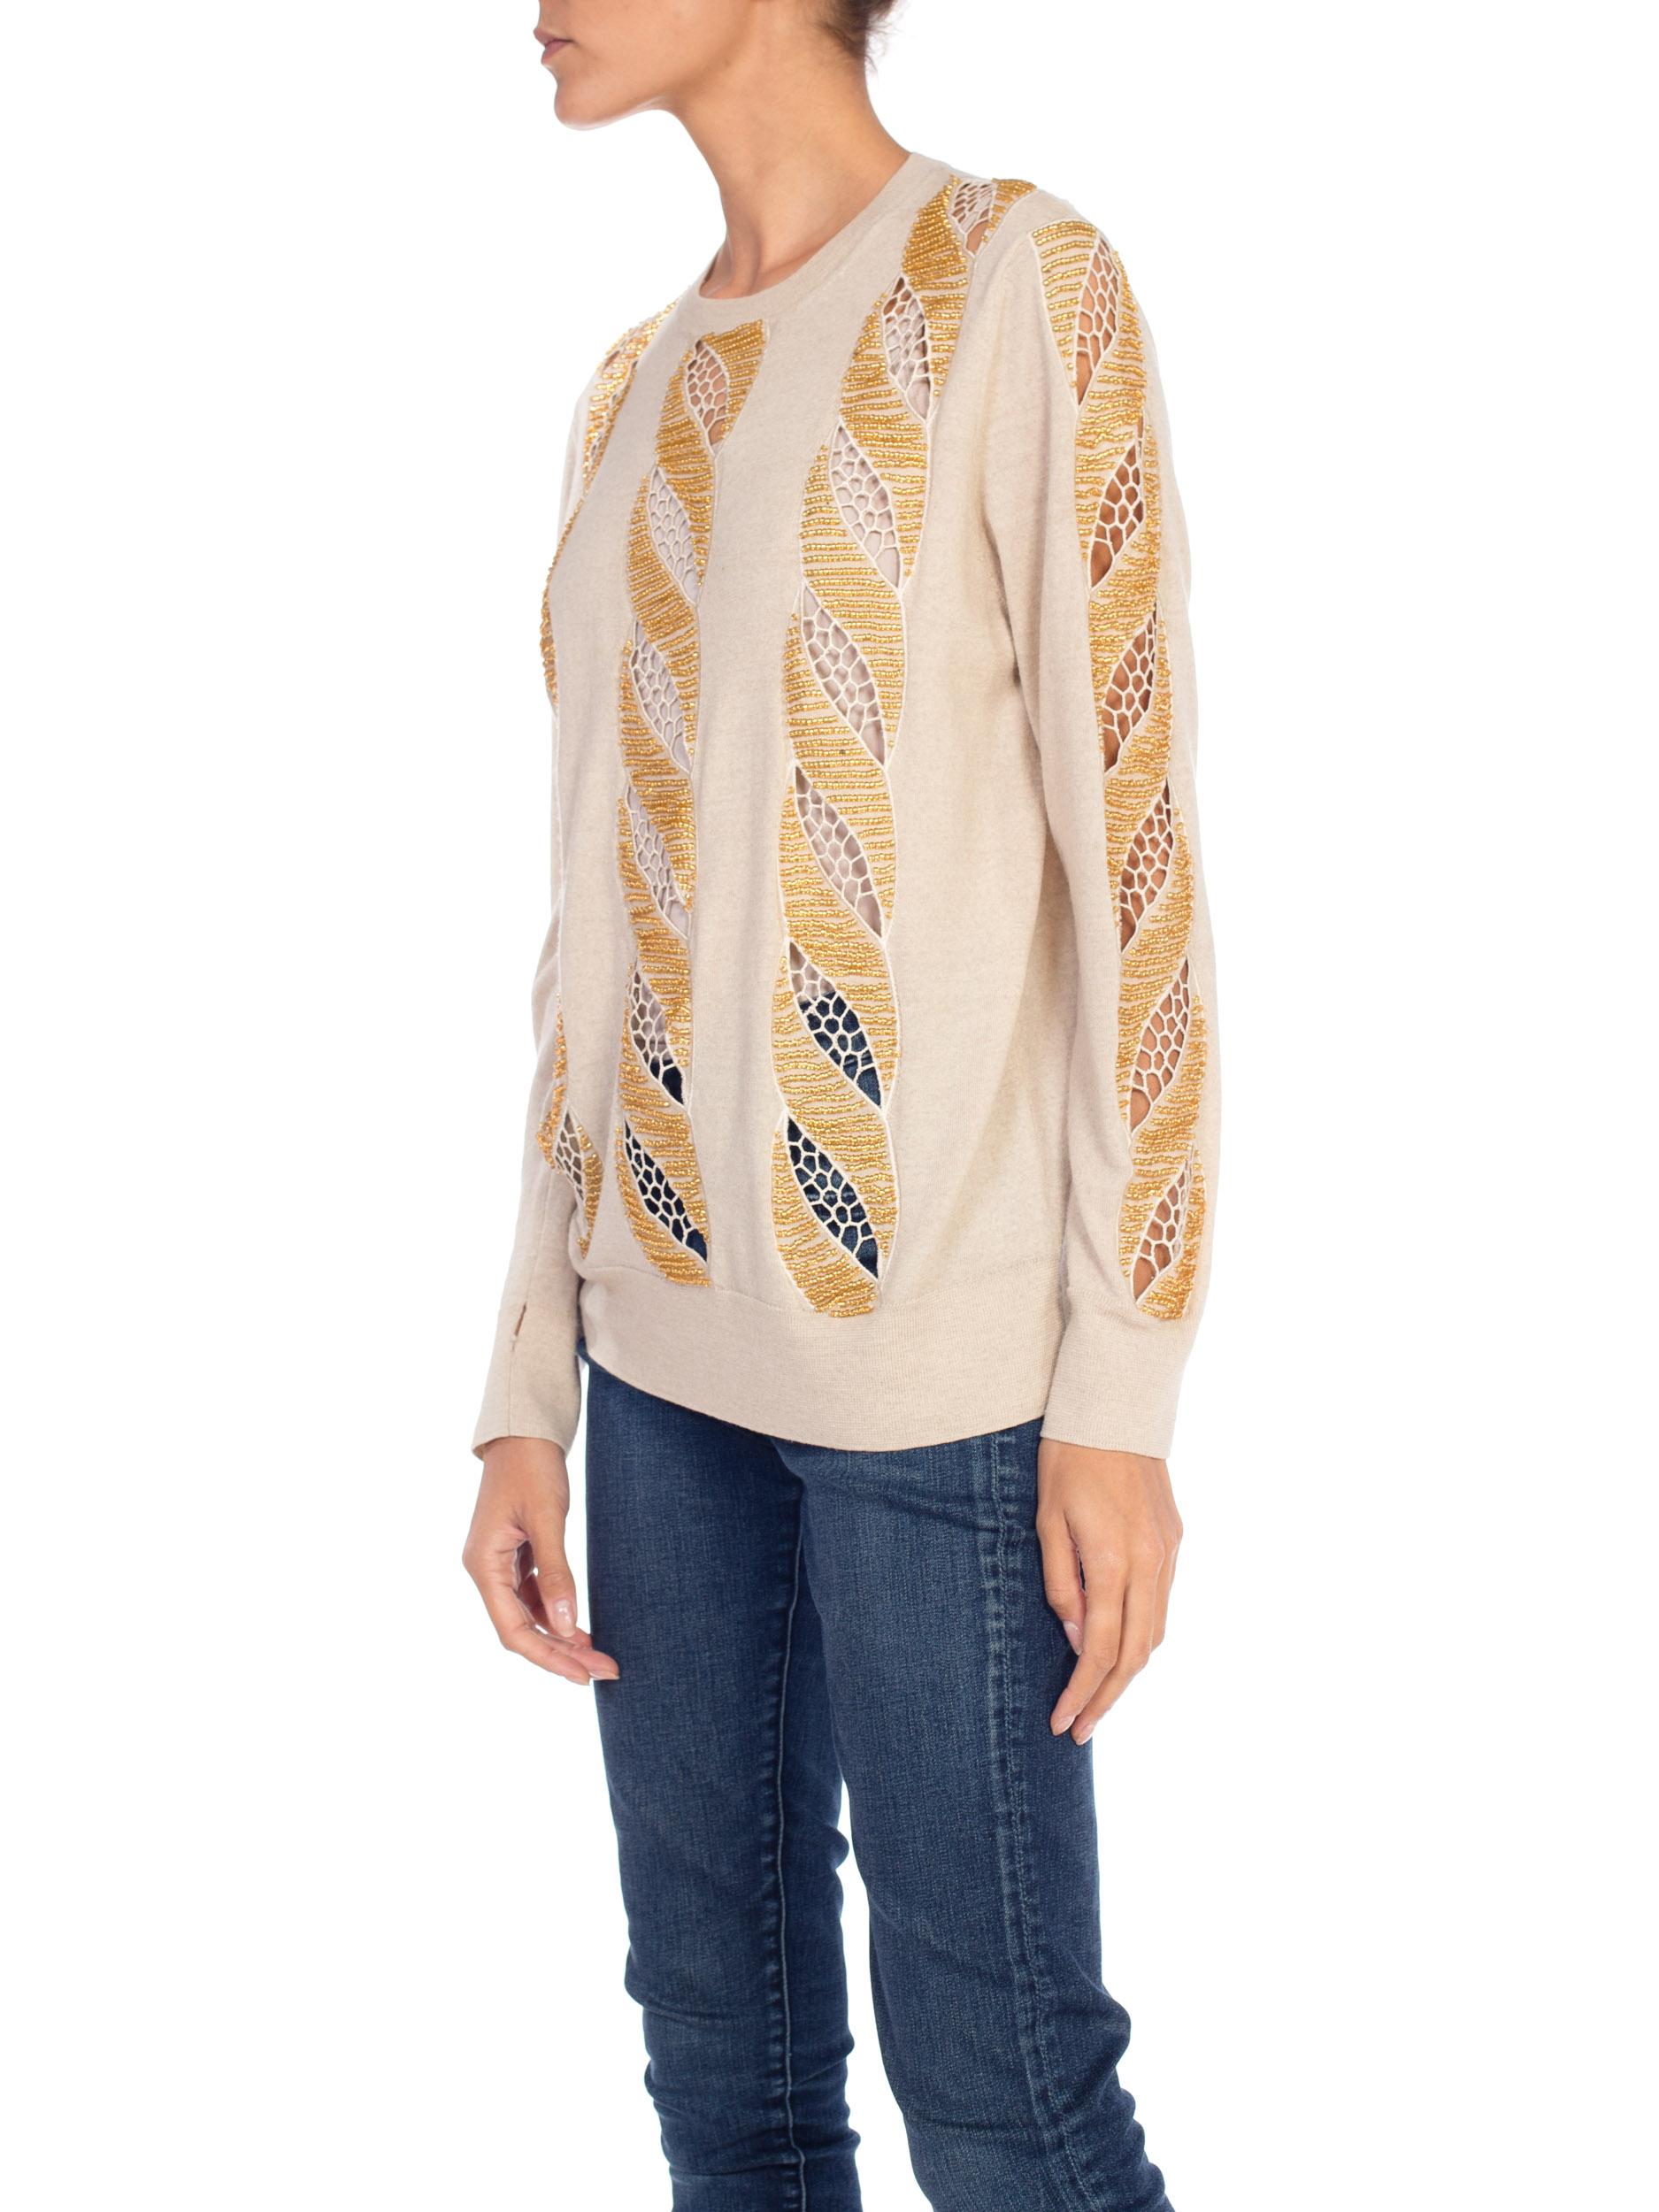 Dries Van Noten Lace Cut Out Gold Beaded Sweater  4